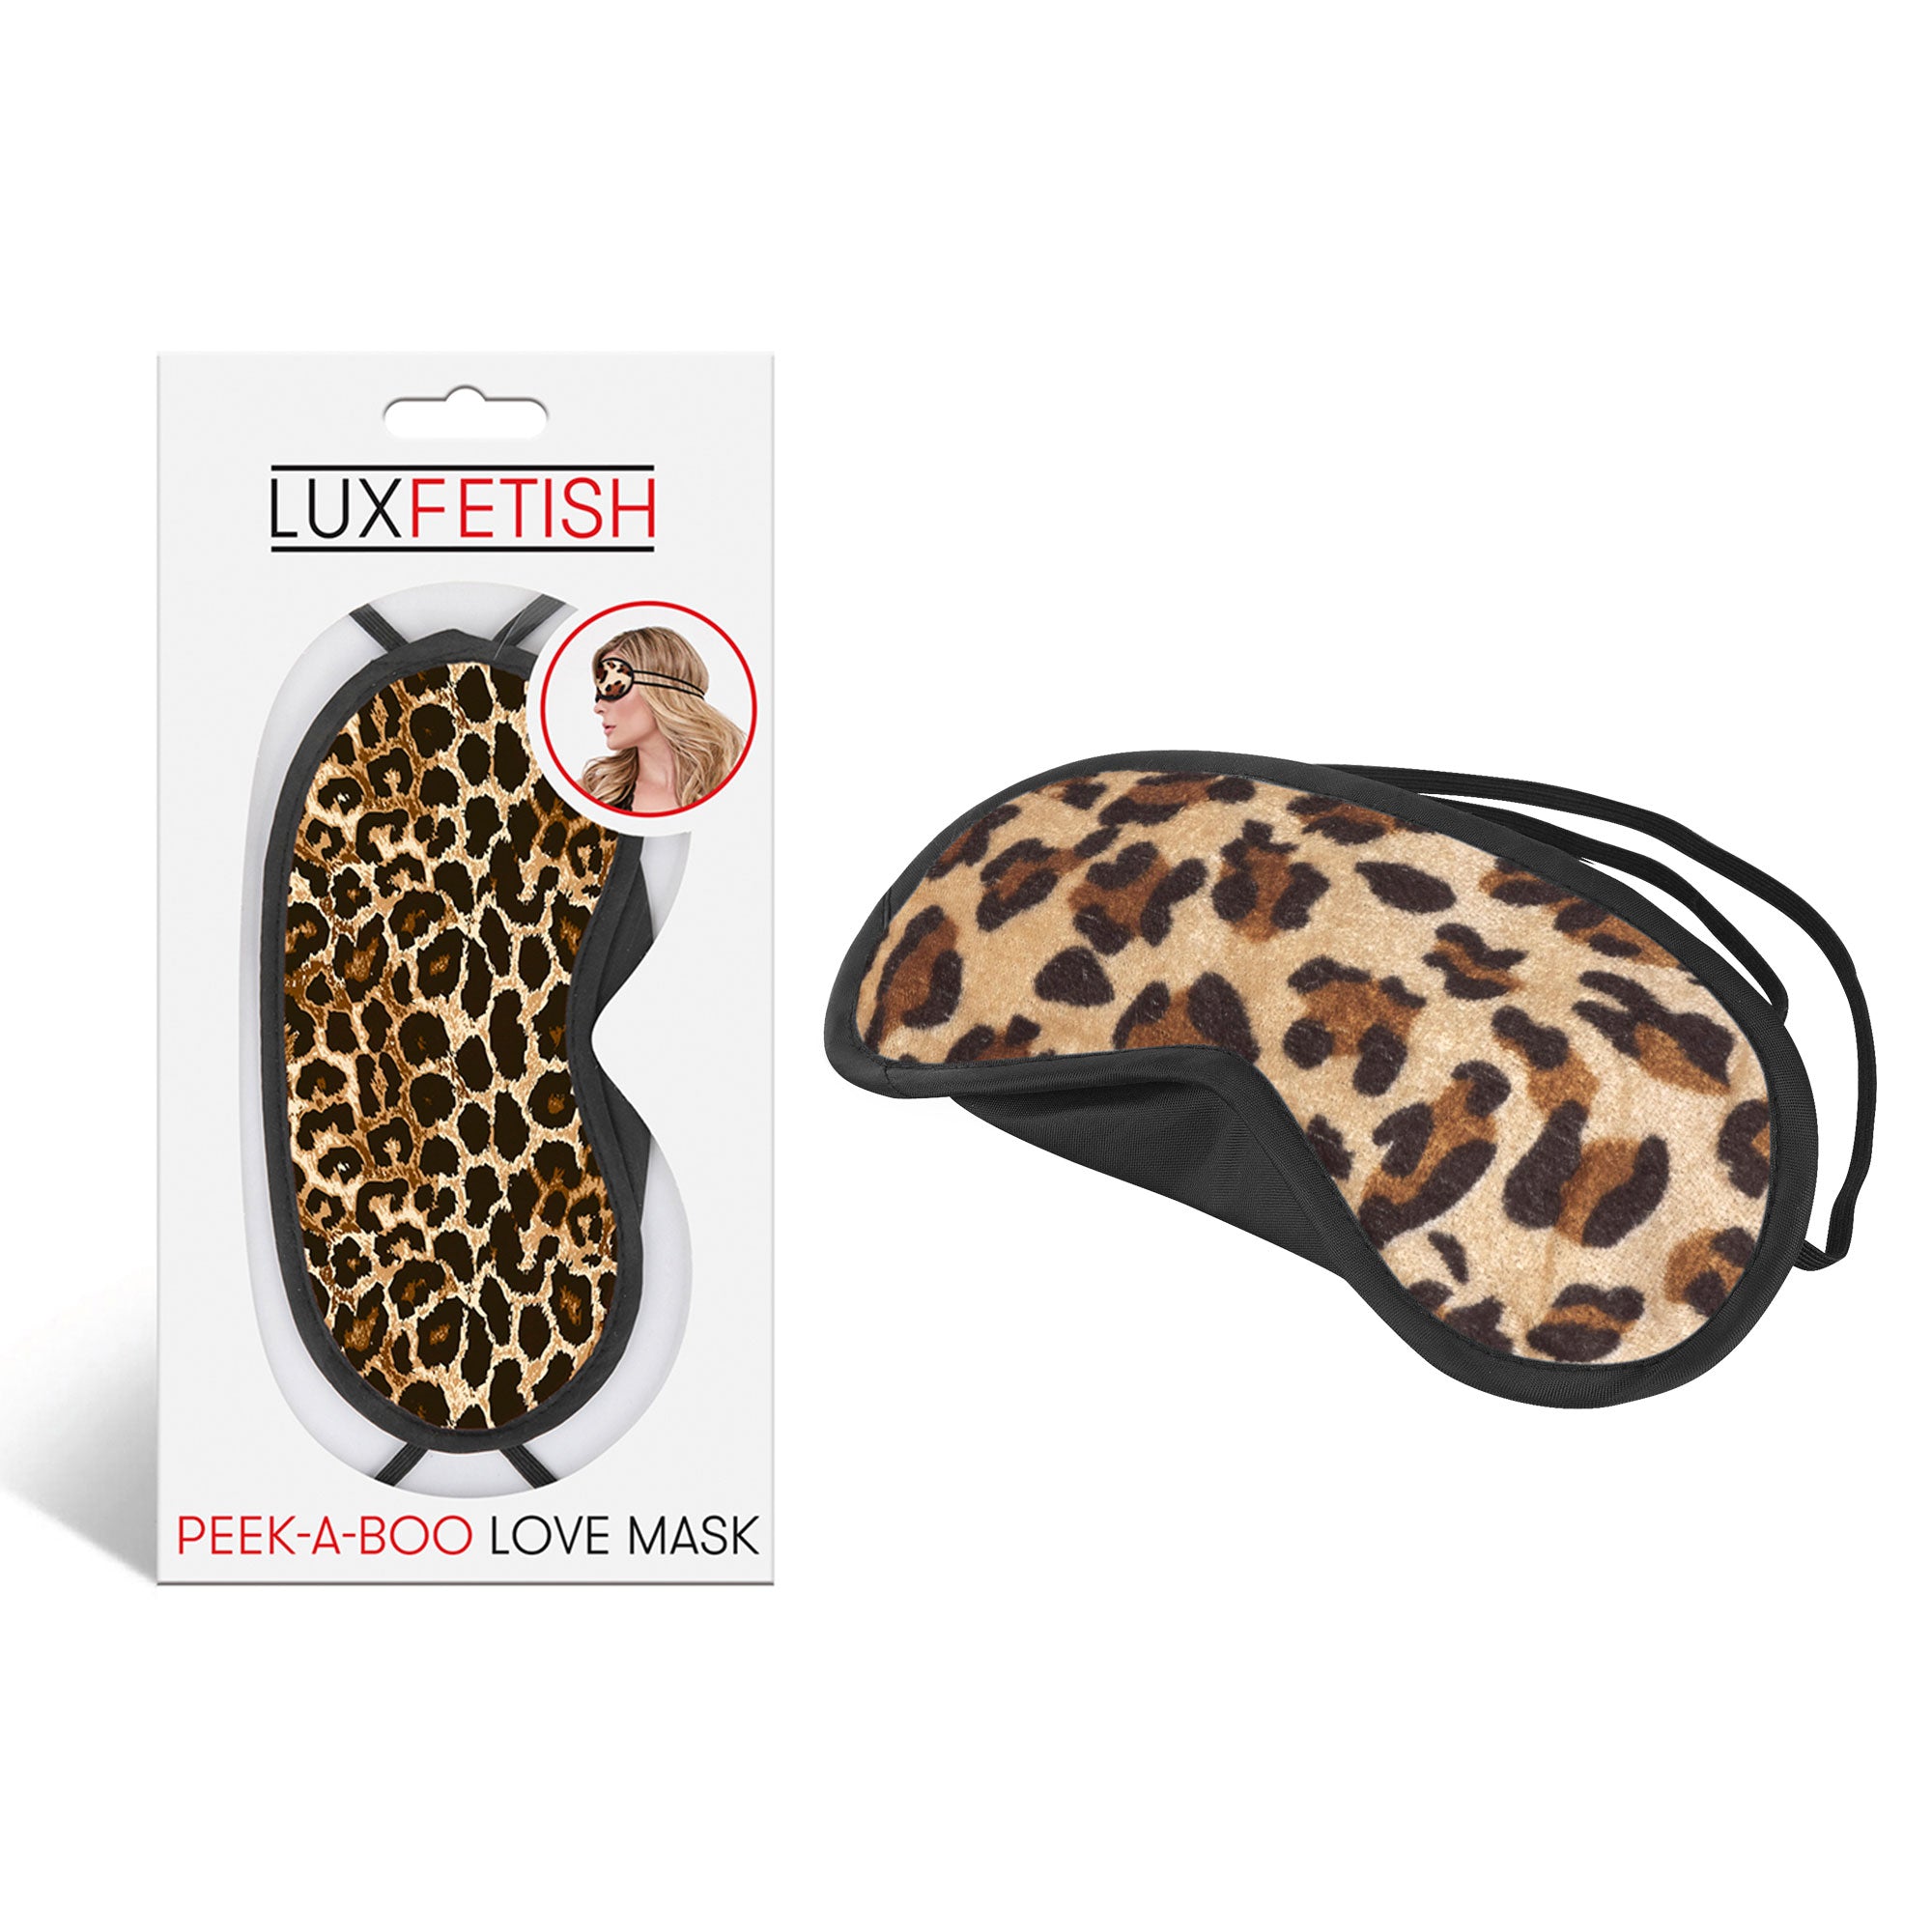 Packaging of the Lux Fetish Peek-A-Boo Love Mask - Leopard Print at glastoy.com